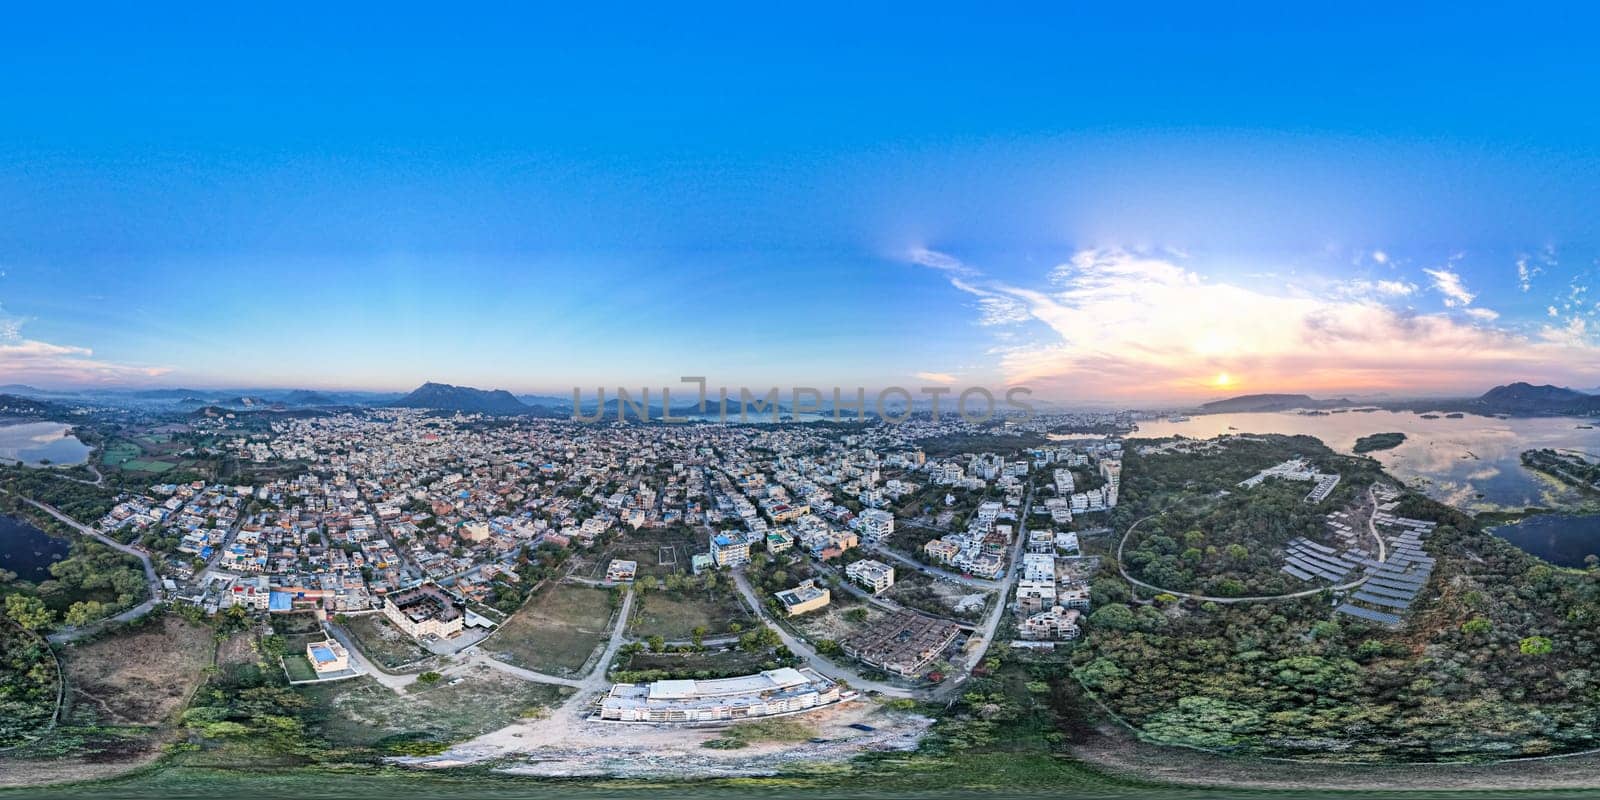 360 spherical image of cityscape of Udaipur city Rajasthan at sunset with houses and trees below and a blue sky of dawn above by Shalinimathur